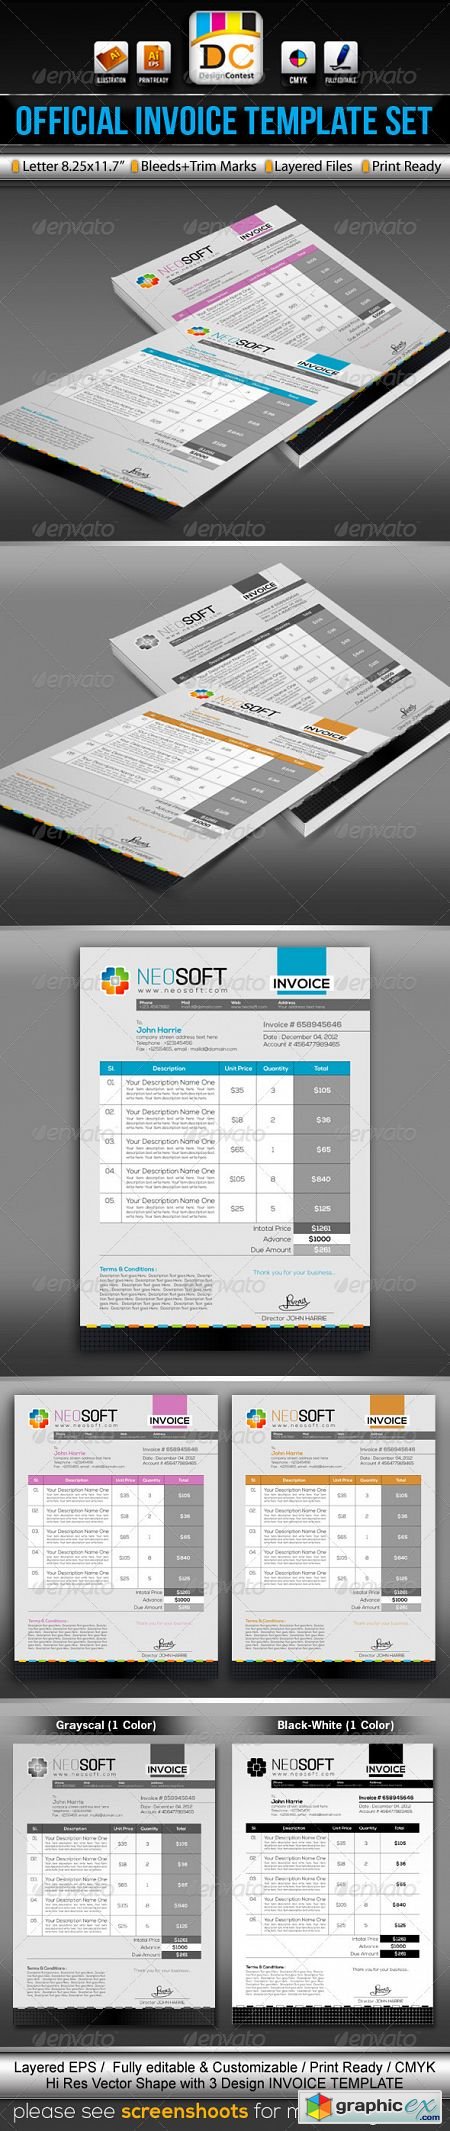 Download NeoSoft_Official Invoice/Cash Memo Template Set » Free Download Vector Stock Image Photoshop Icon